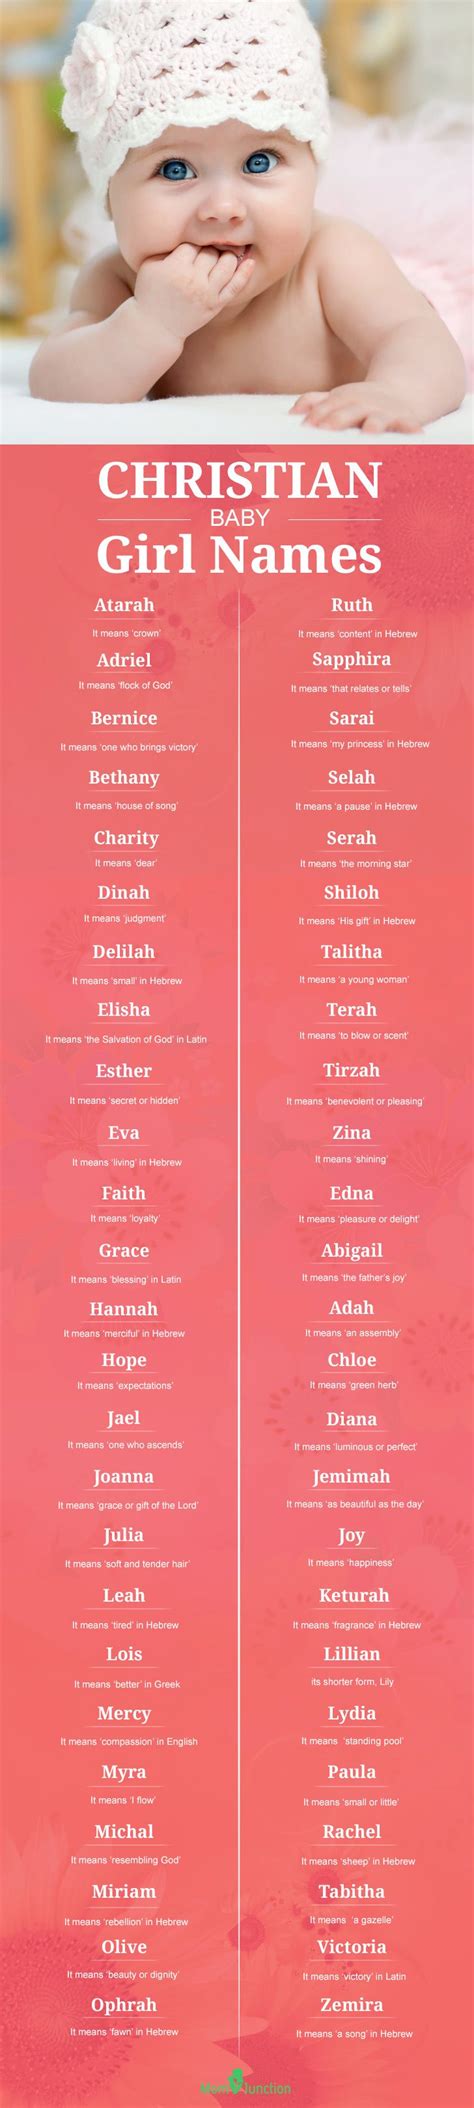 50 Beautiful Christian Baby Girl Names With Their Meanings Bible Names